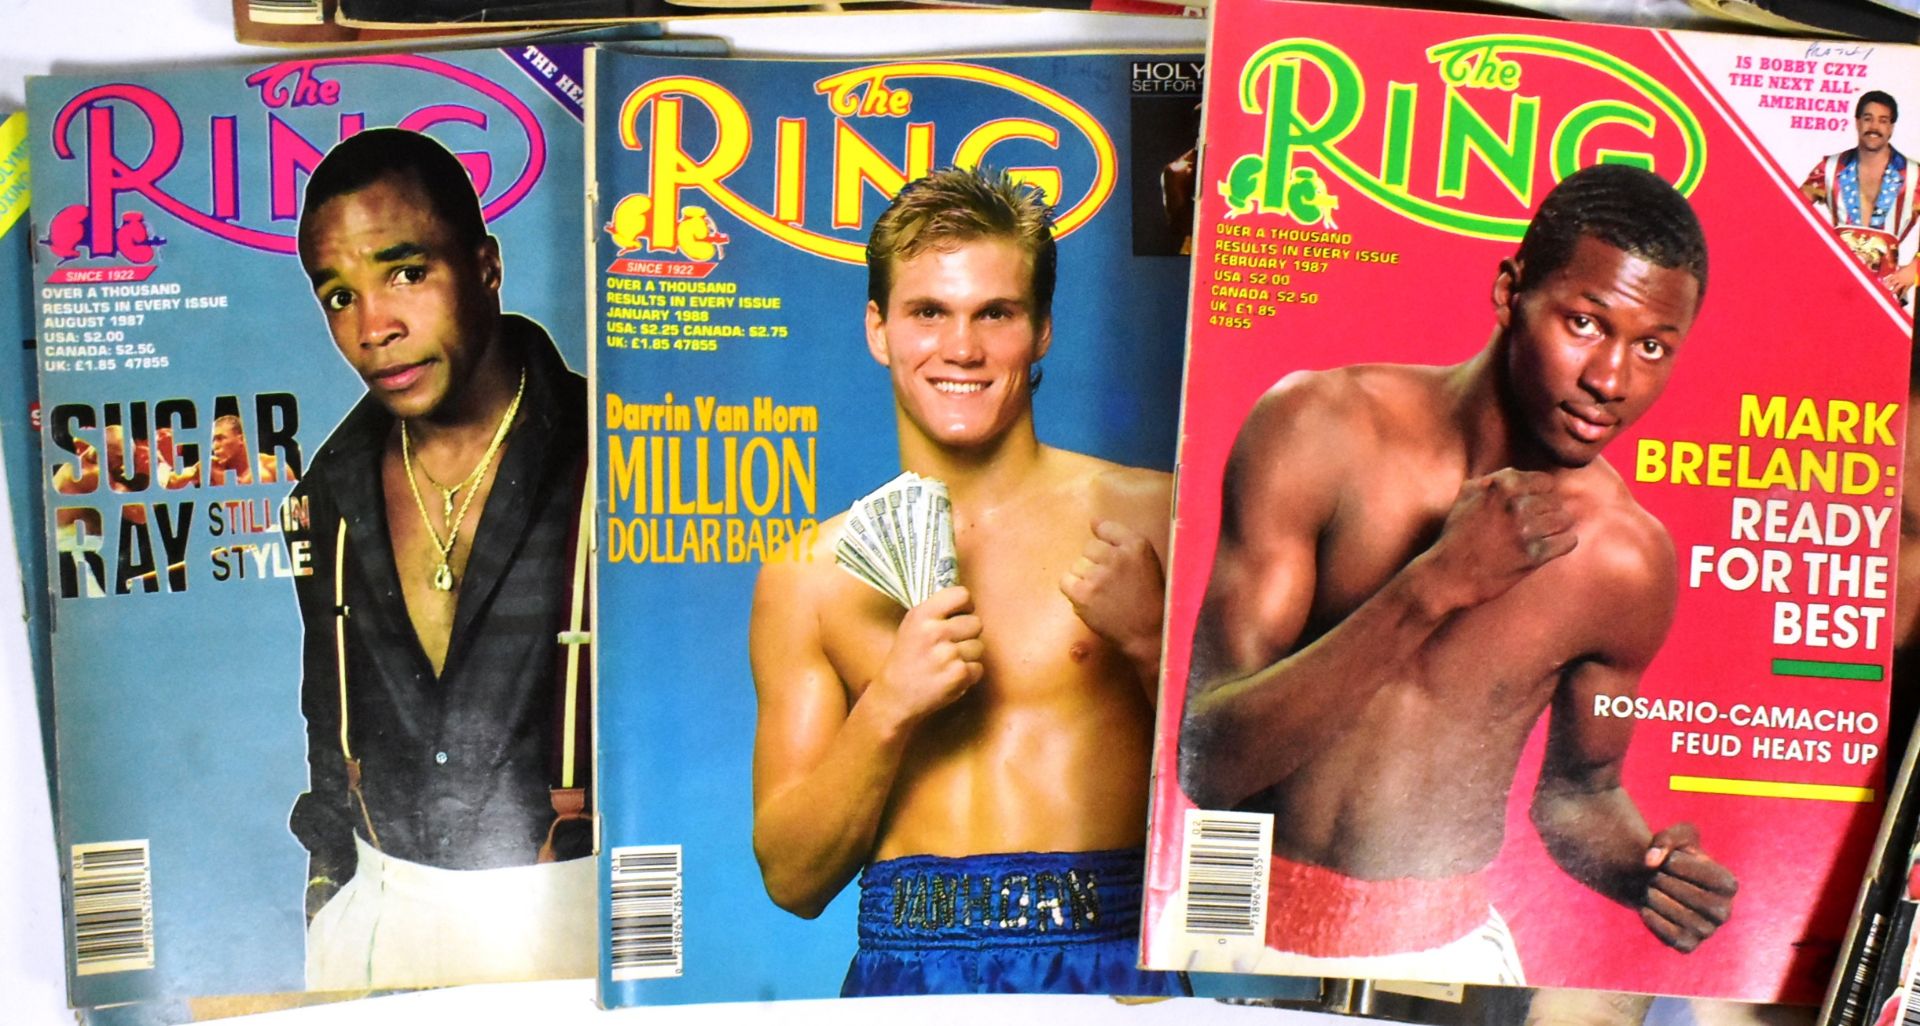 COLLECTION OF VINTAGE WRESTLING MAGAZINES - THE RING - Image 3 of 5